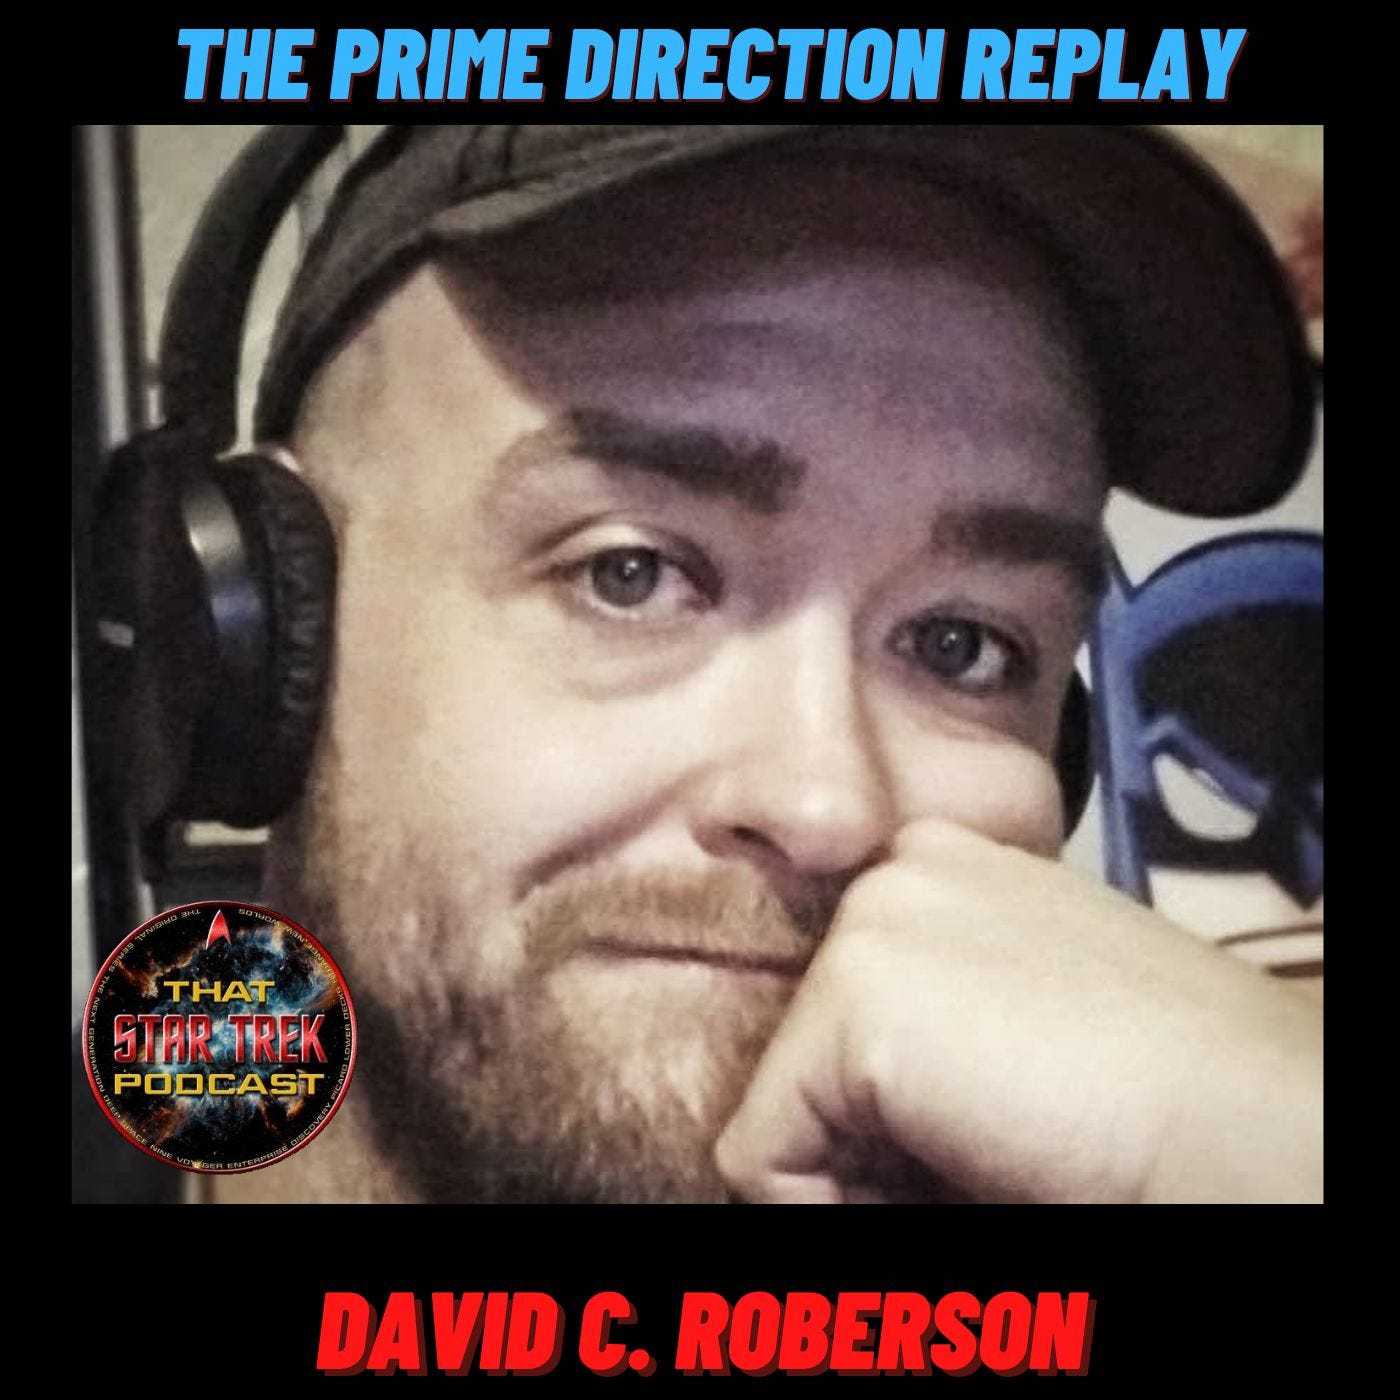 The Prime Direction Replay: David C. Roberson